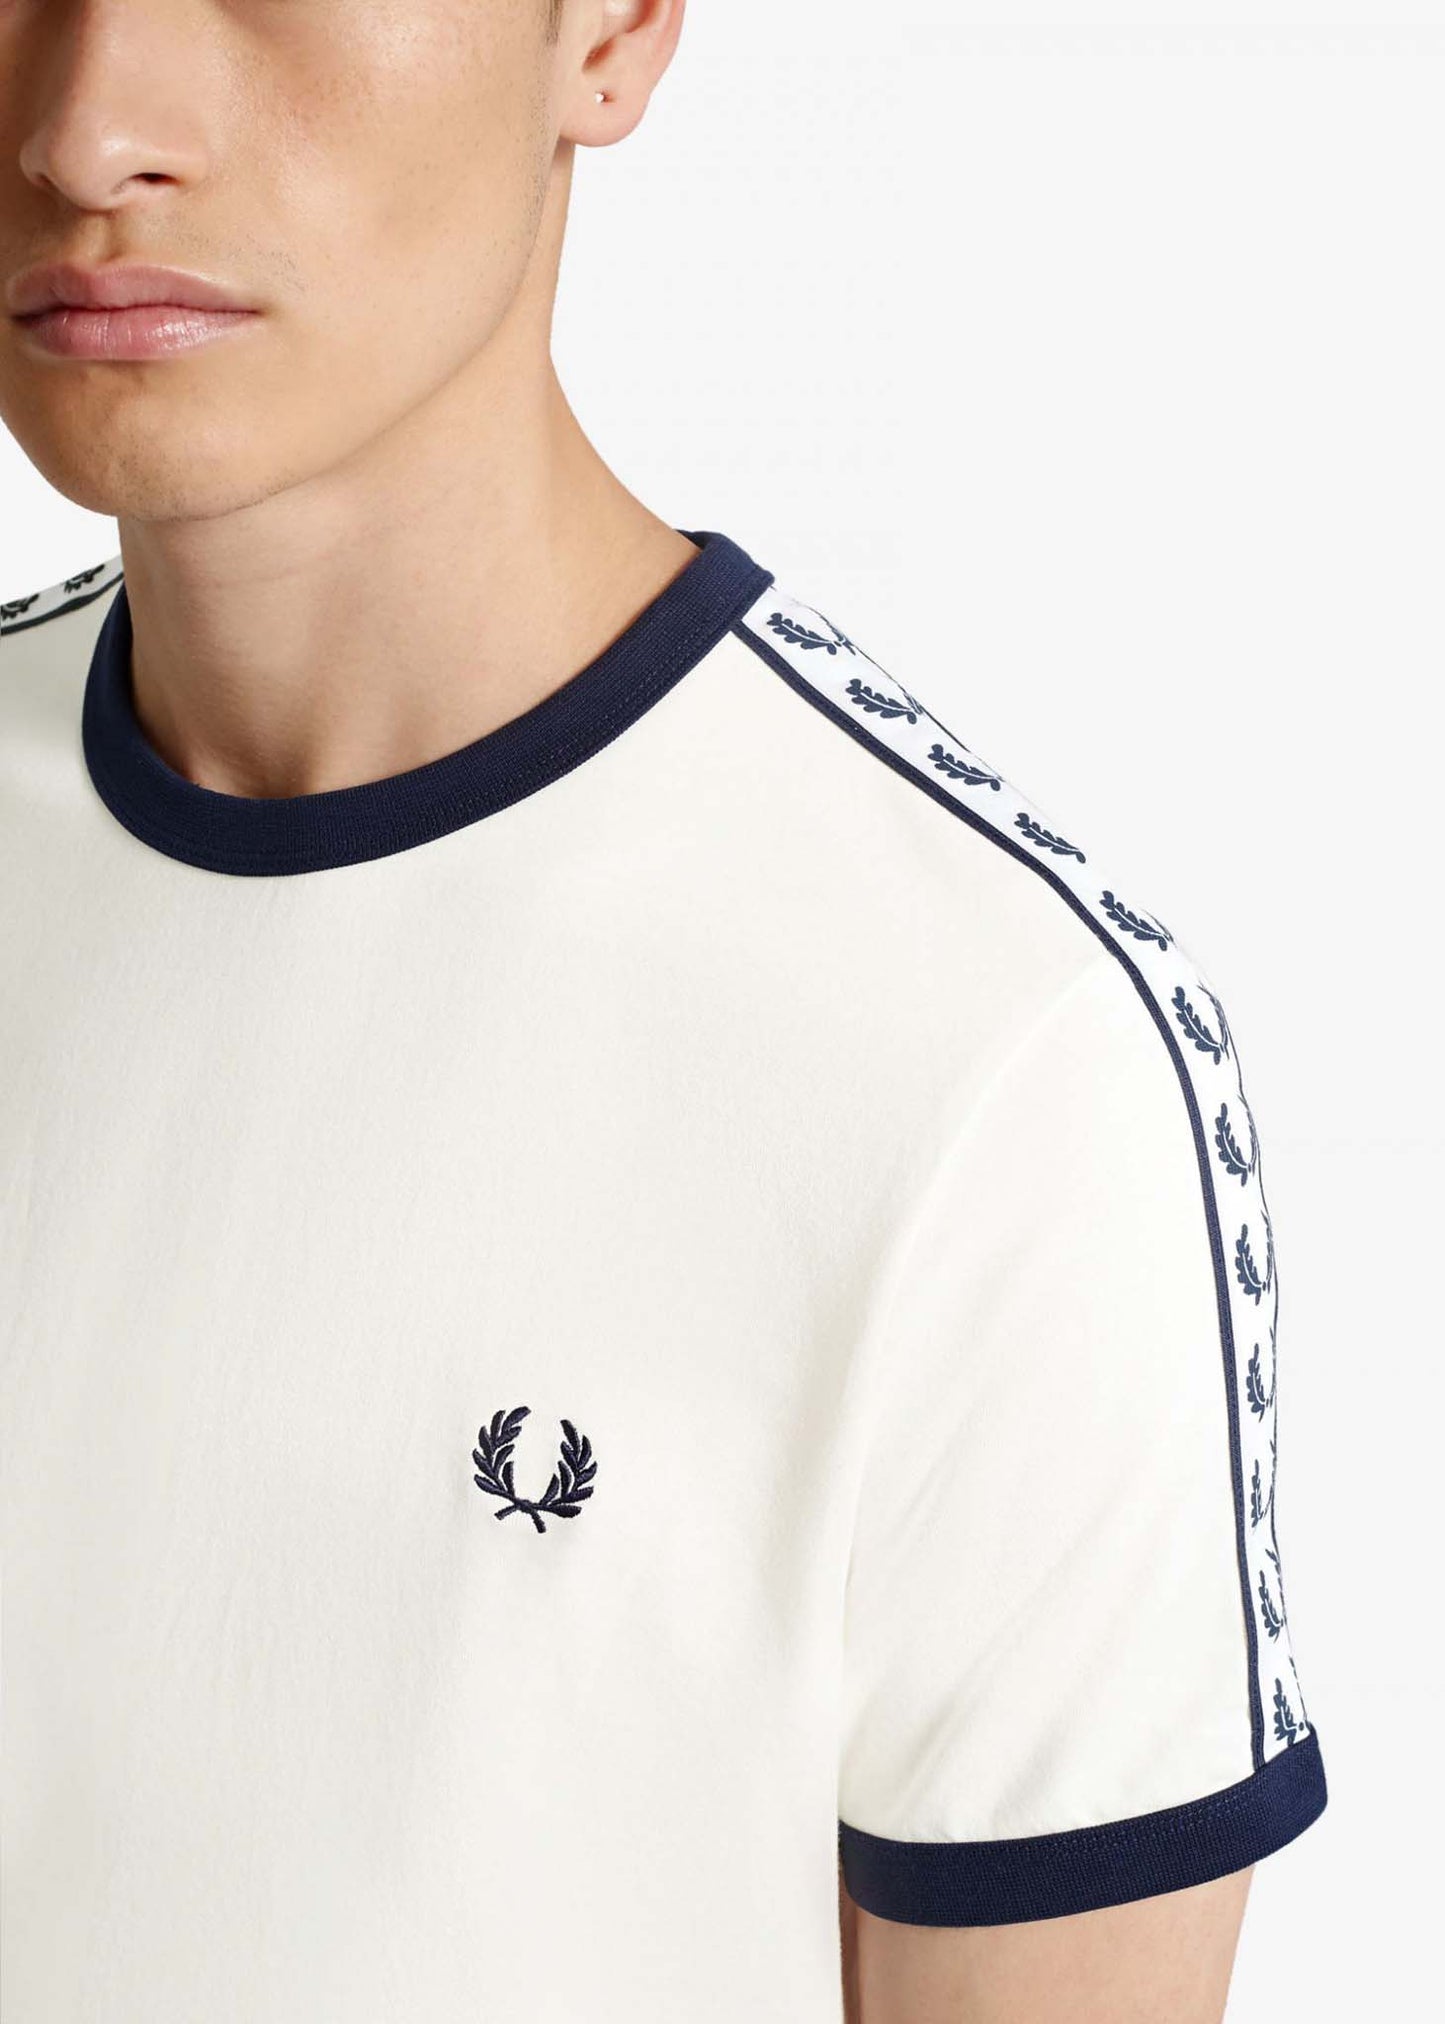 Fred Perry t-shirt snow white